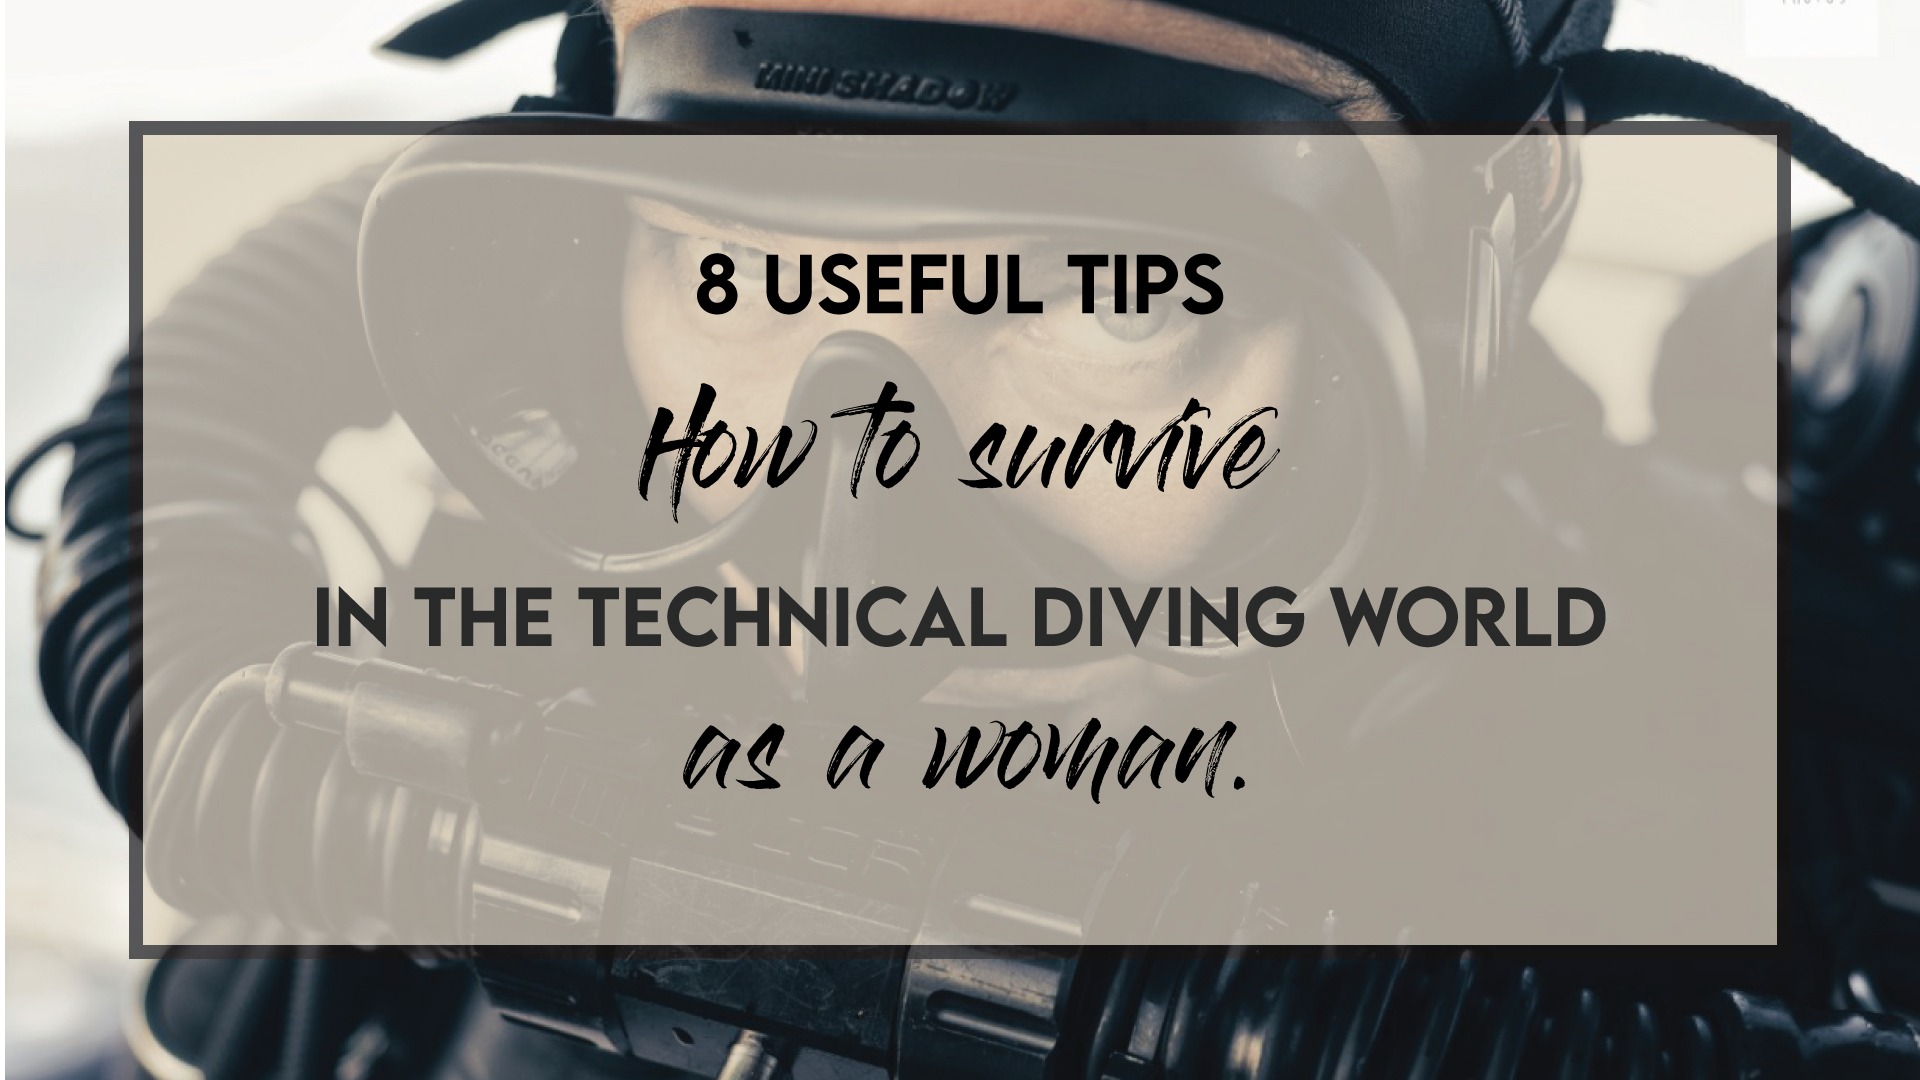 Wonan-in-technical-diving-tips-how-to-survive